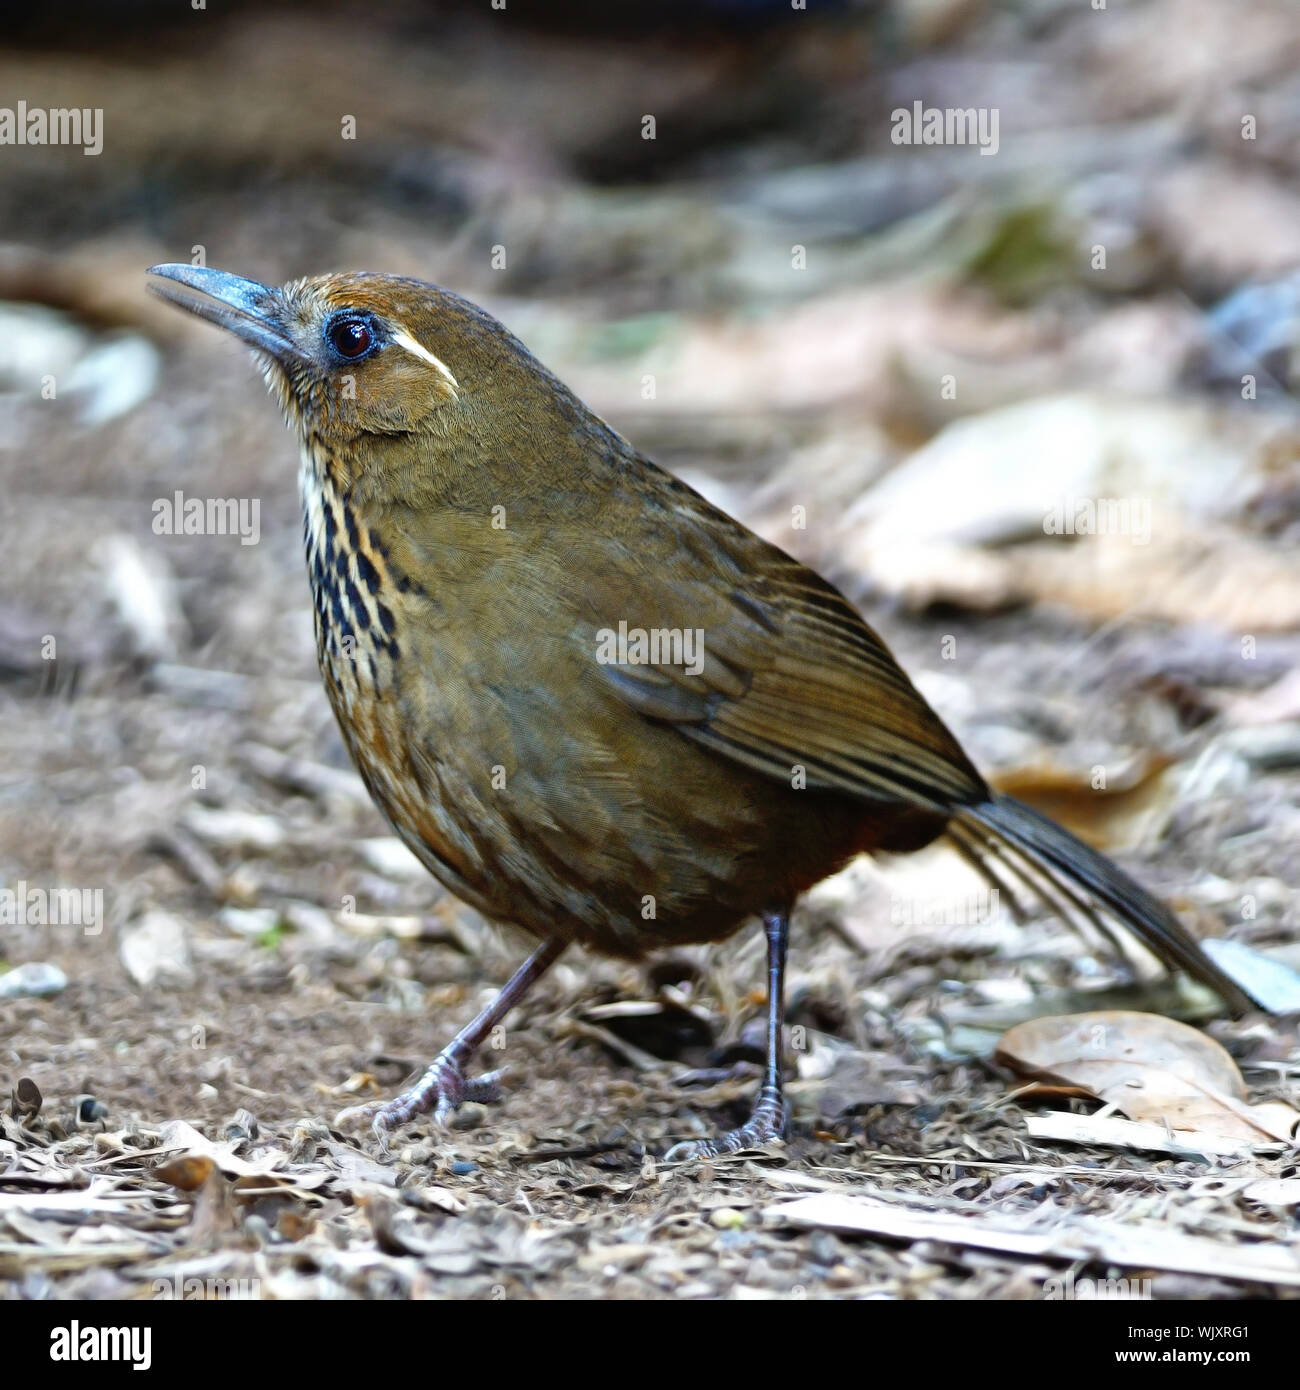 Spot-breasted Laughingthrush (Stactocichia merulina), uncommon species of Laughingthrush bird, singing a song on the ground, taken in Thailand Stock Photo